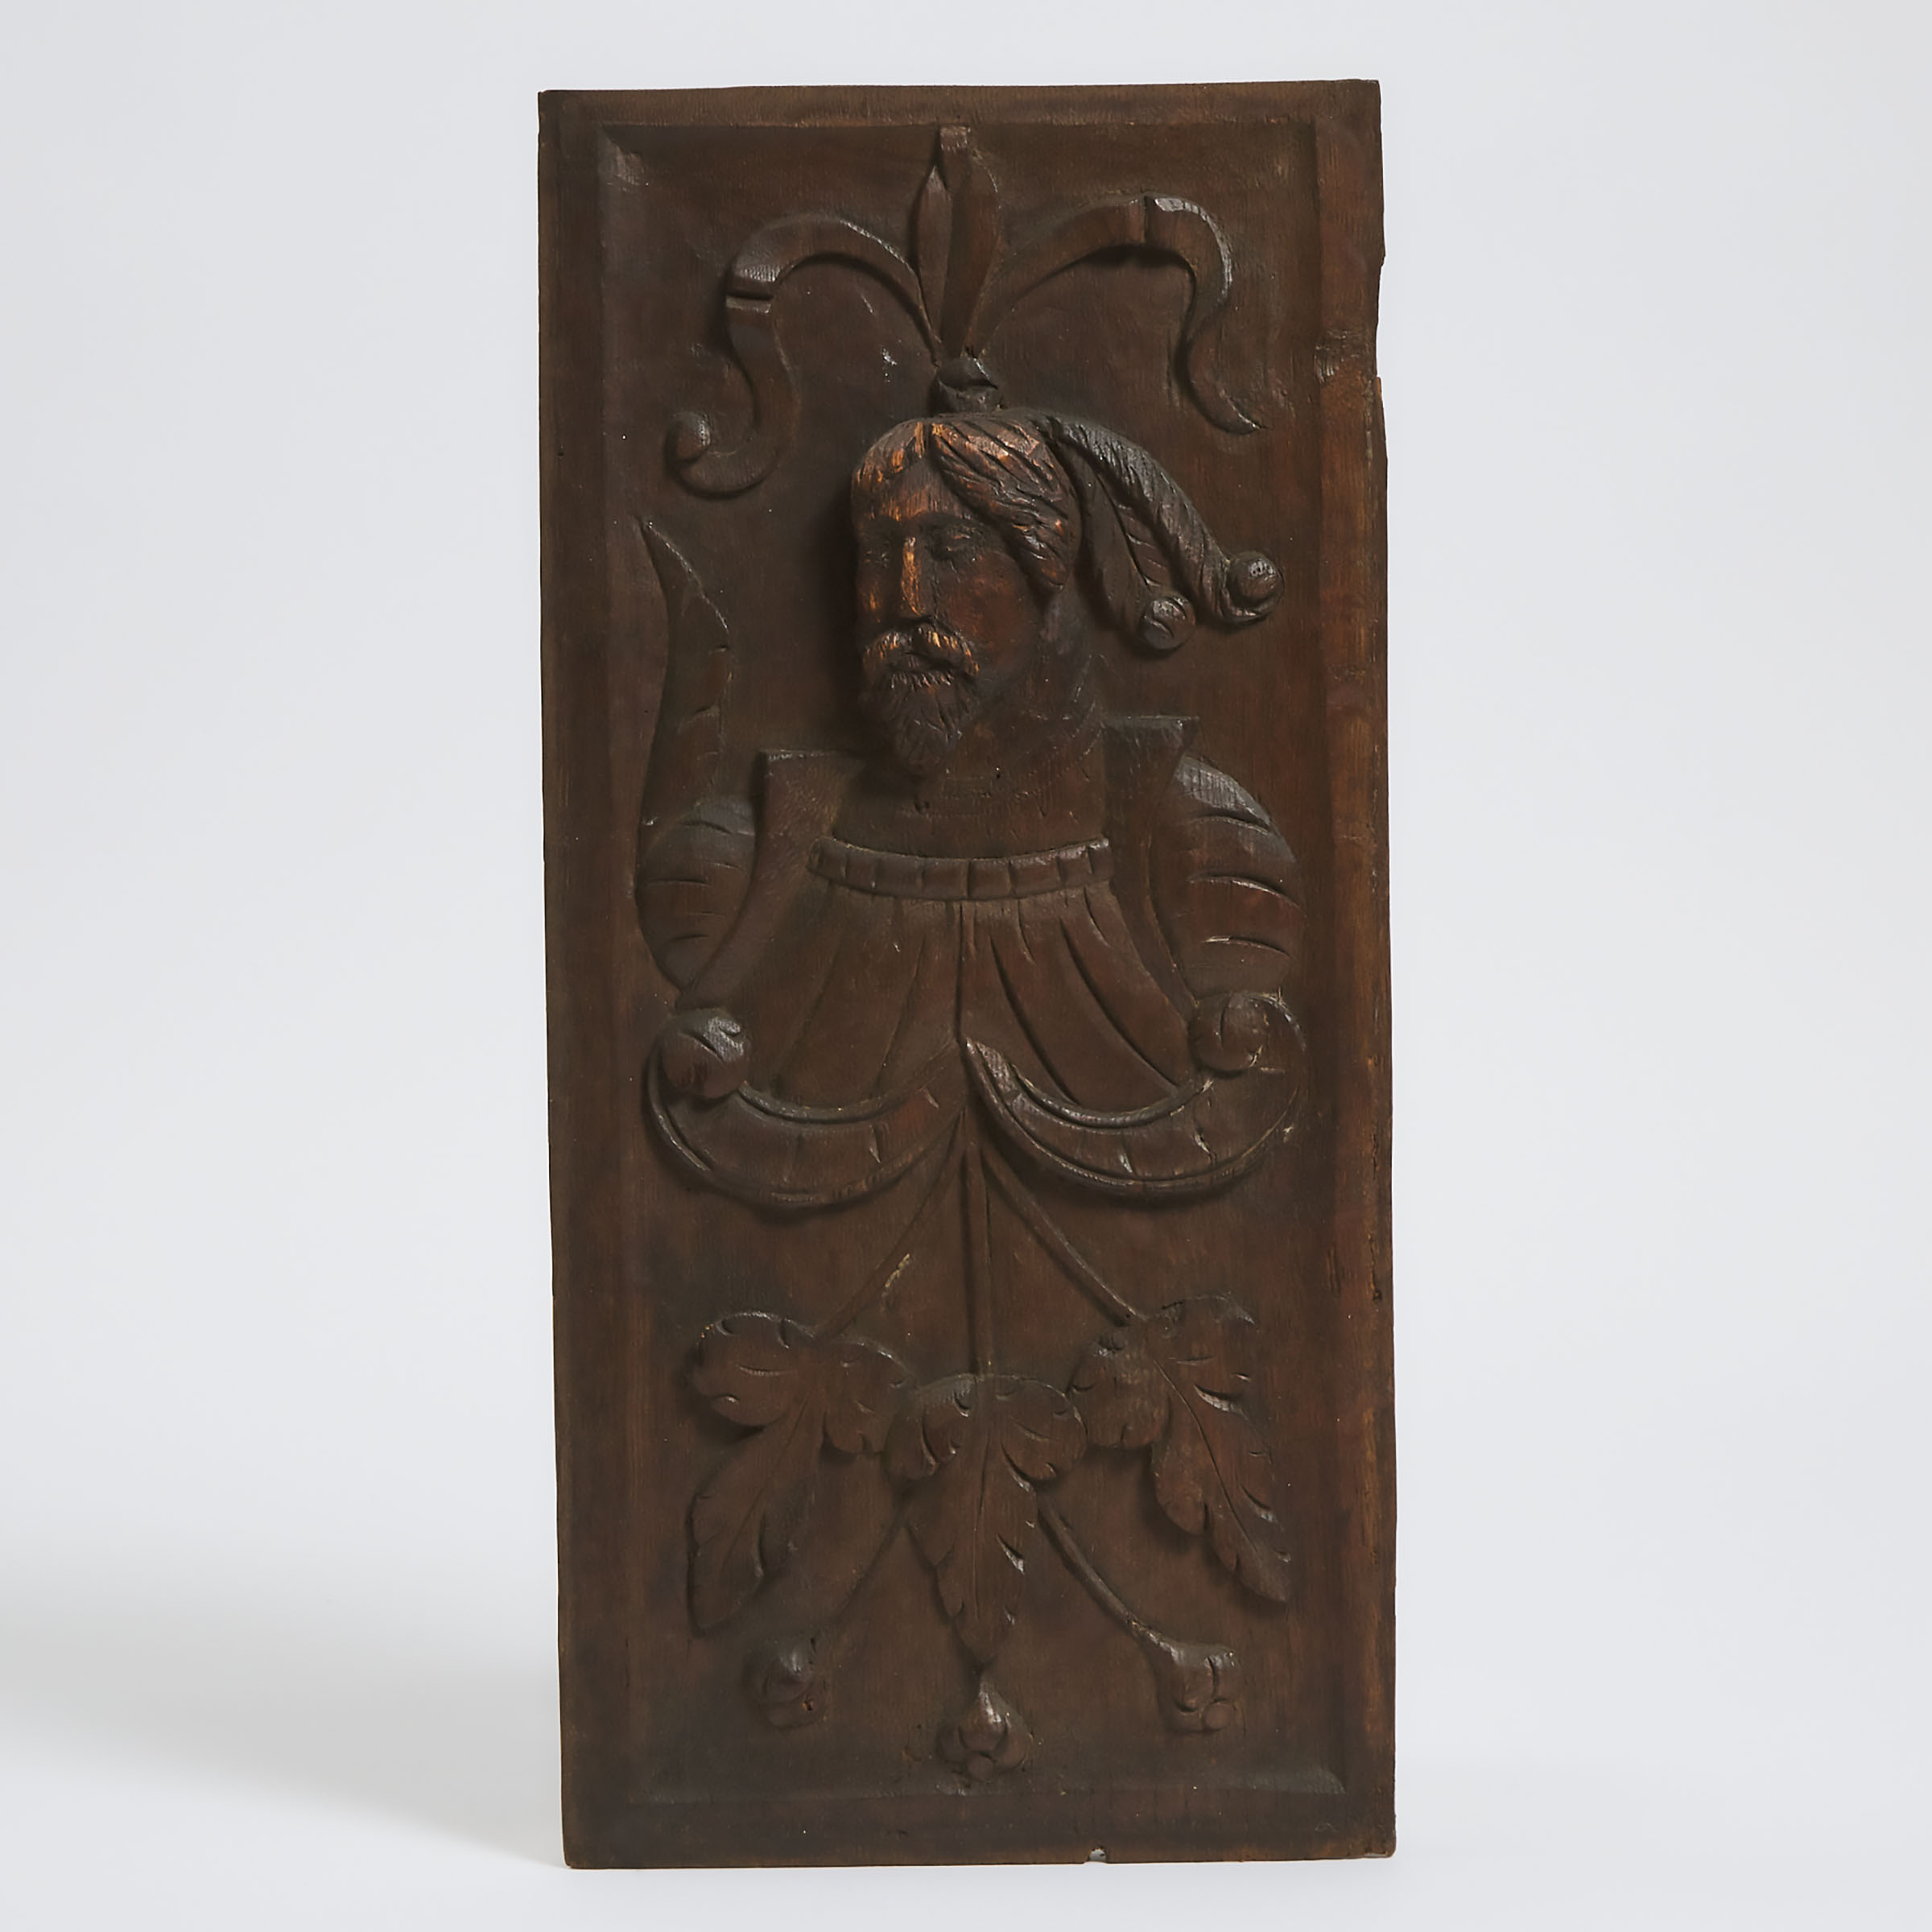 English Relief Carved Oak Panel with Bust of a Gentleman, 16th century